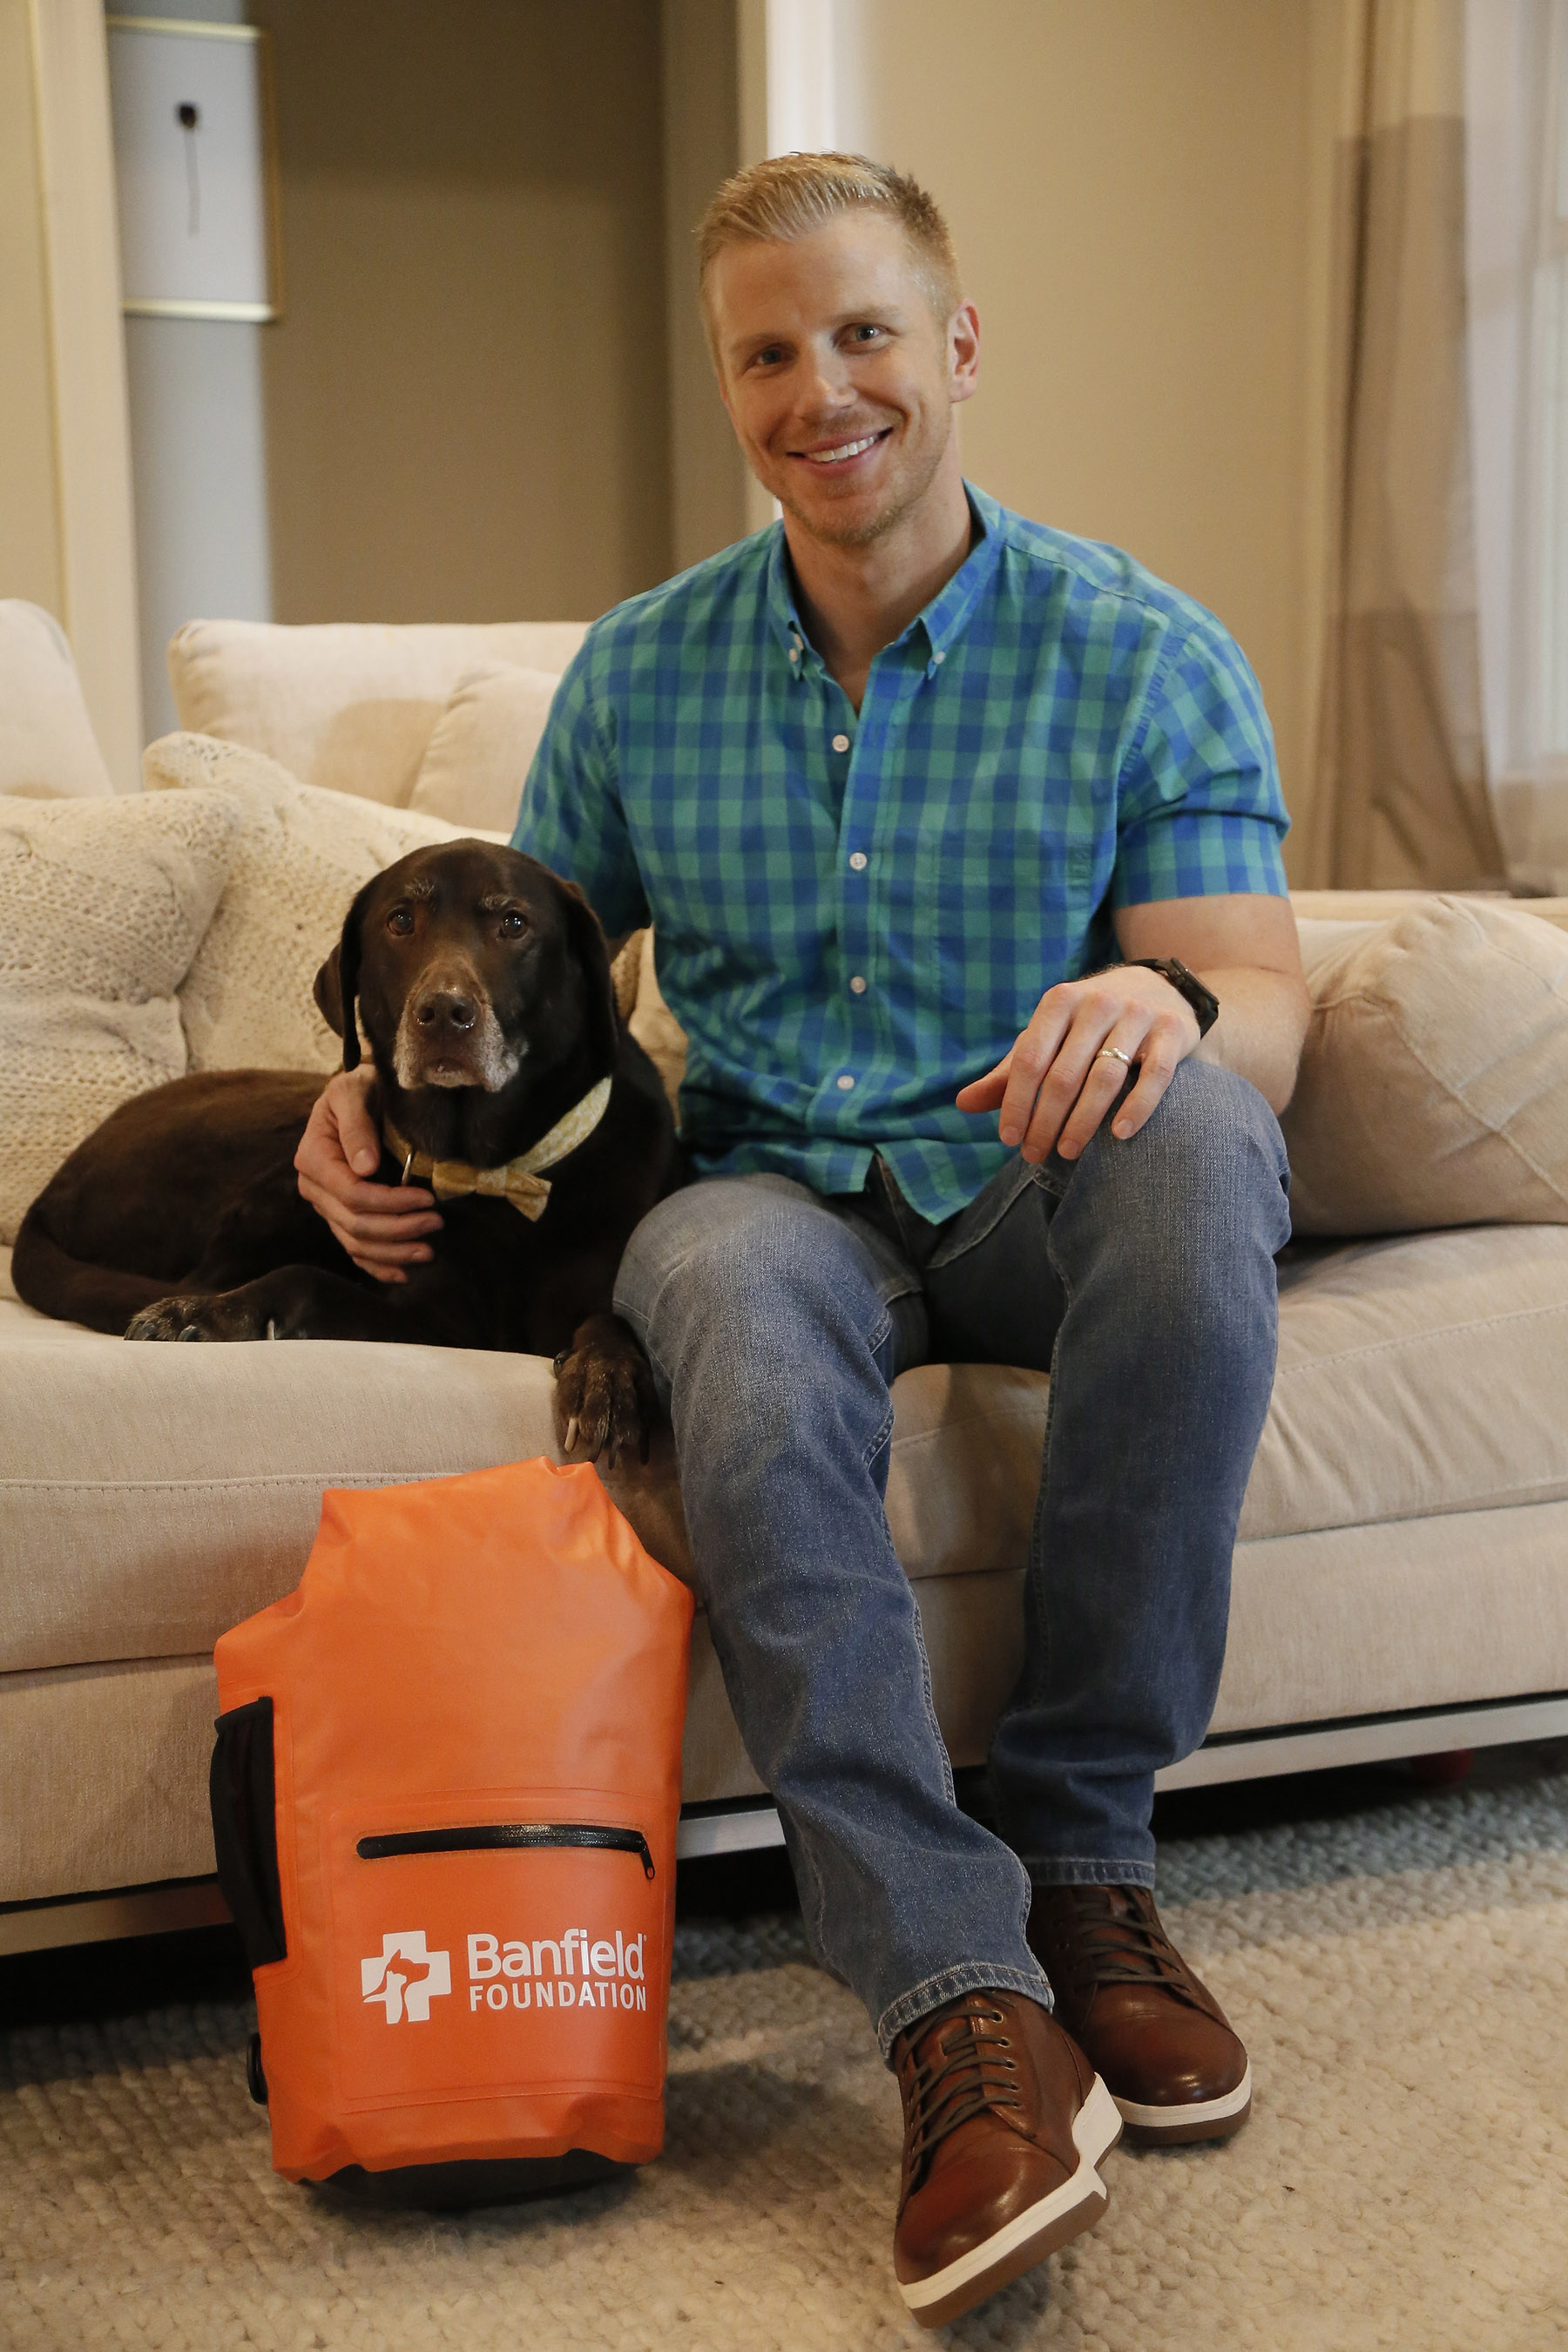 In advance of hurricane season, TV personality and Hurricane Harvey responder, Sean Lowe, films a public service announcement (PSA) on pet disaster preparedness with the Banfield Foundation and his dog Ellie at their home in Dallas, Texas. The PSA debuted nationally on June 6, 2018 and educates pet owners on the simple yet potentially life-saving steps they can take for their four-legged family members before disaster strikes. (Photo credit: Brandon Wade/AP Images for the Banfield Foundation).